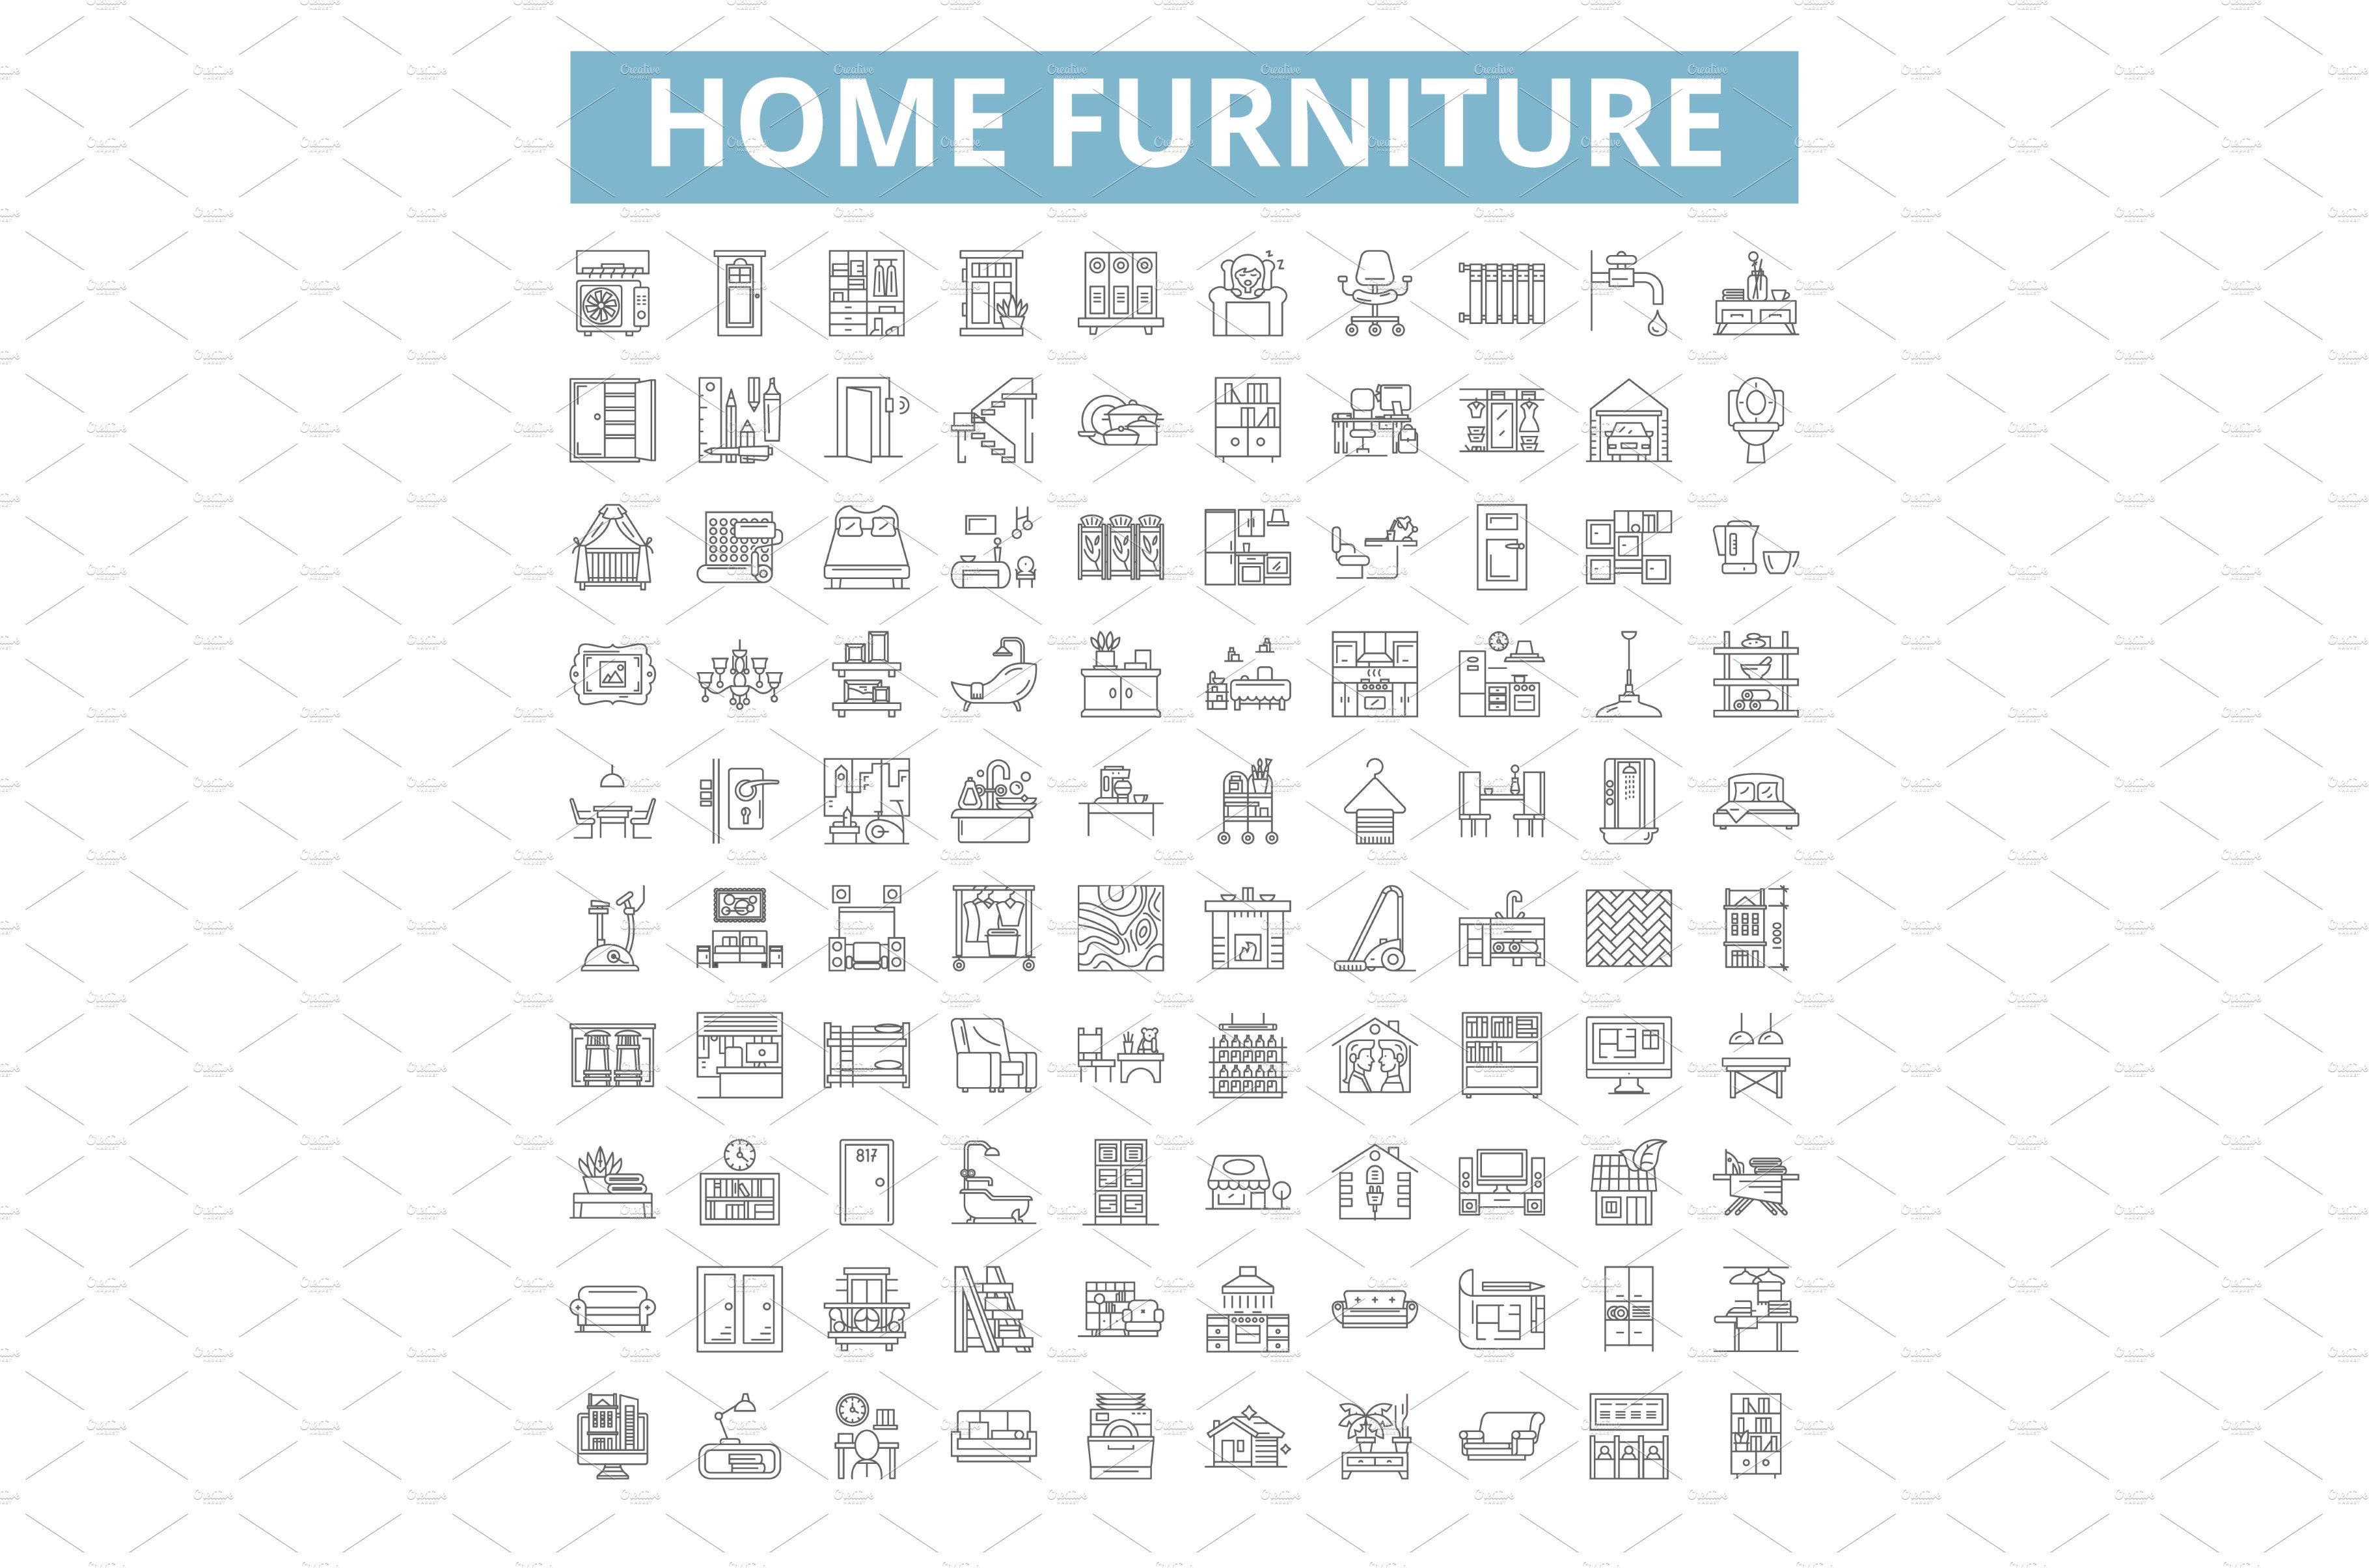 Home furniture icons, line symbols cover image.